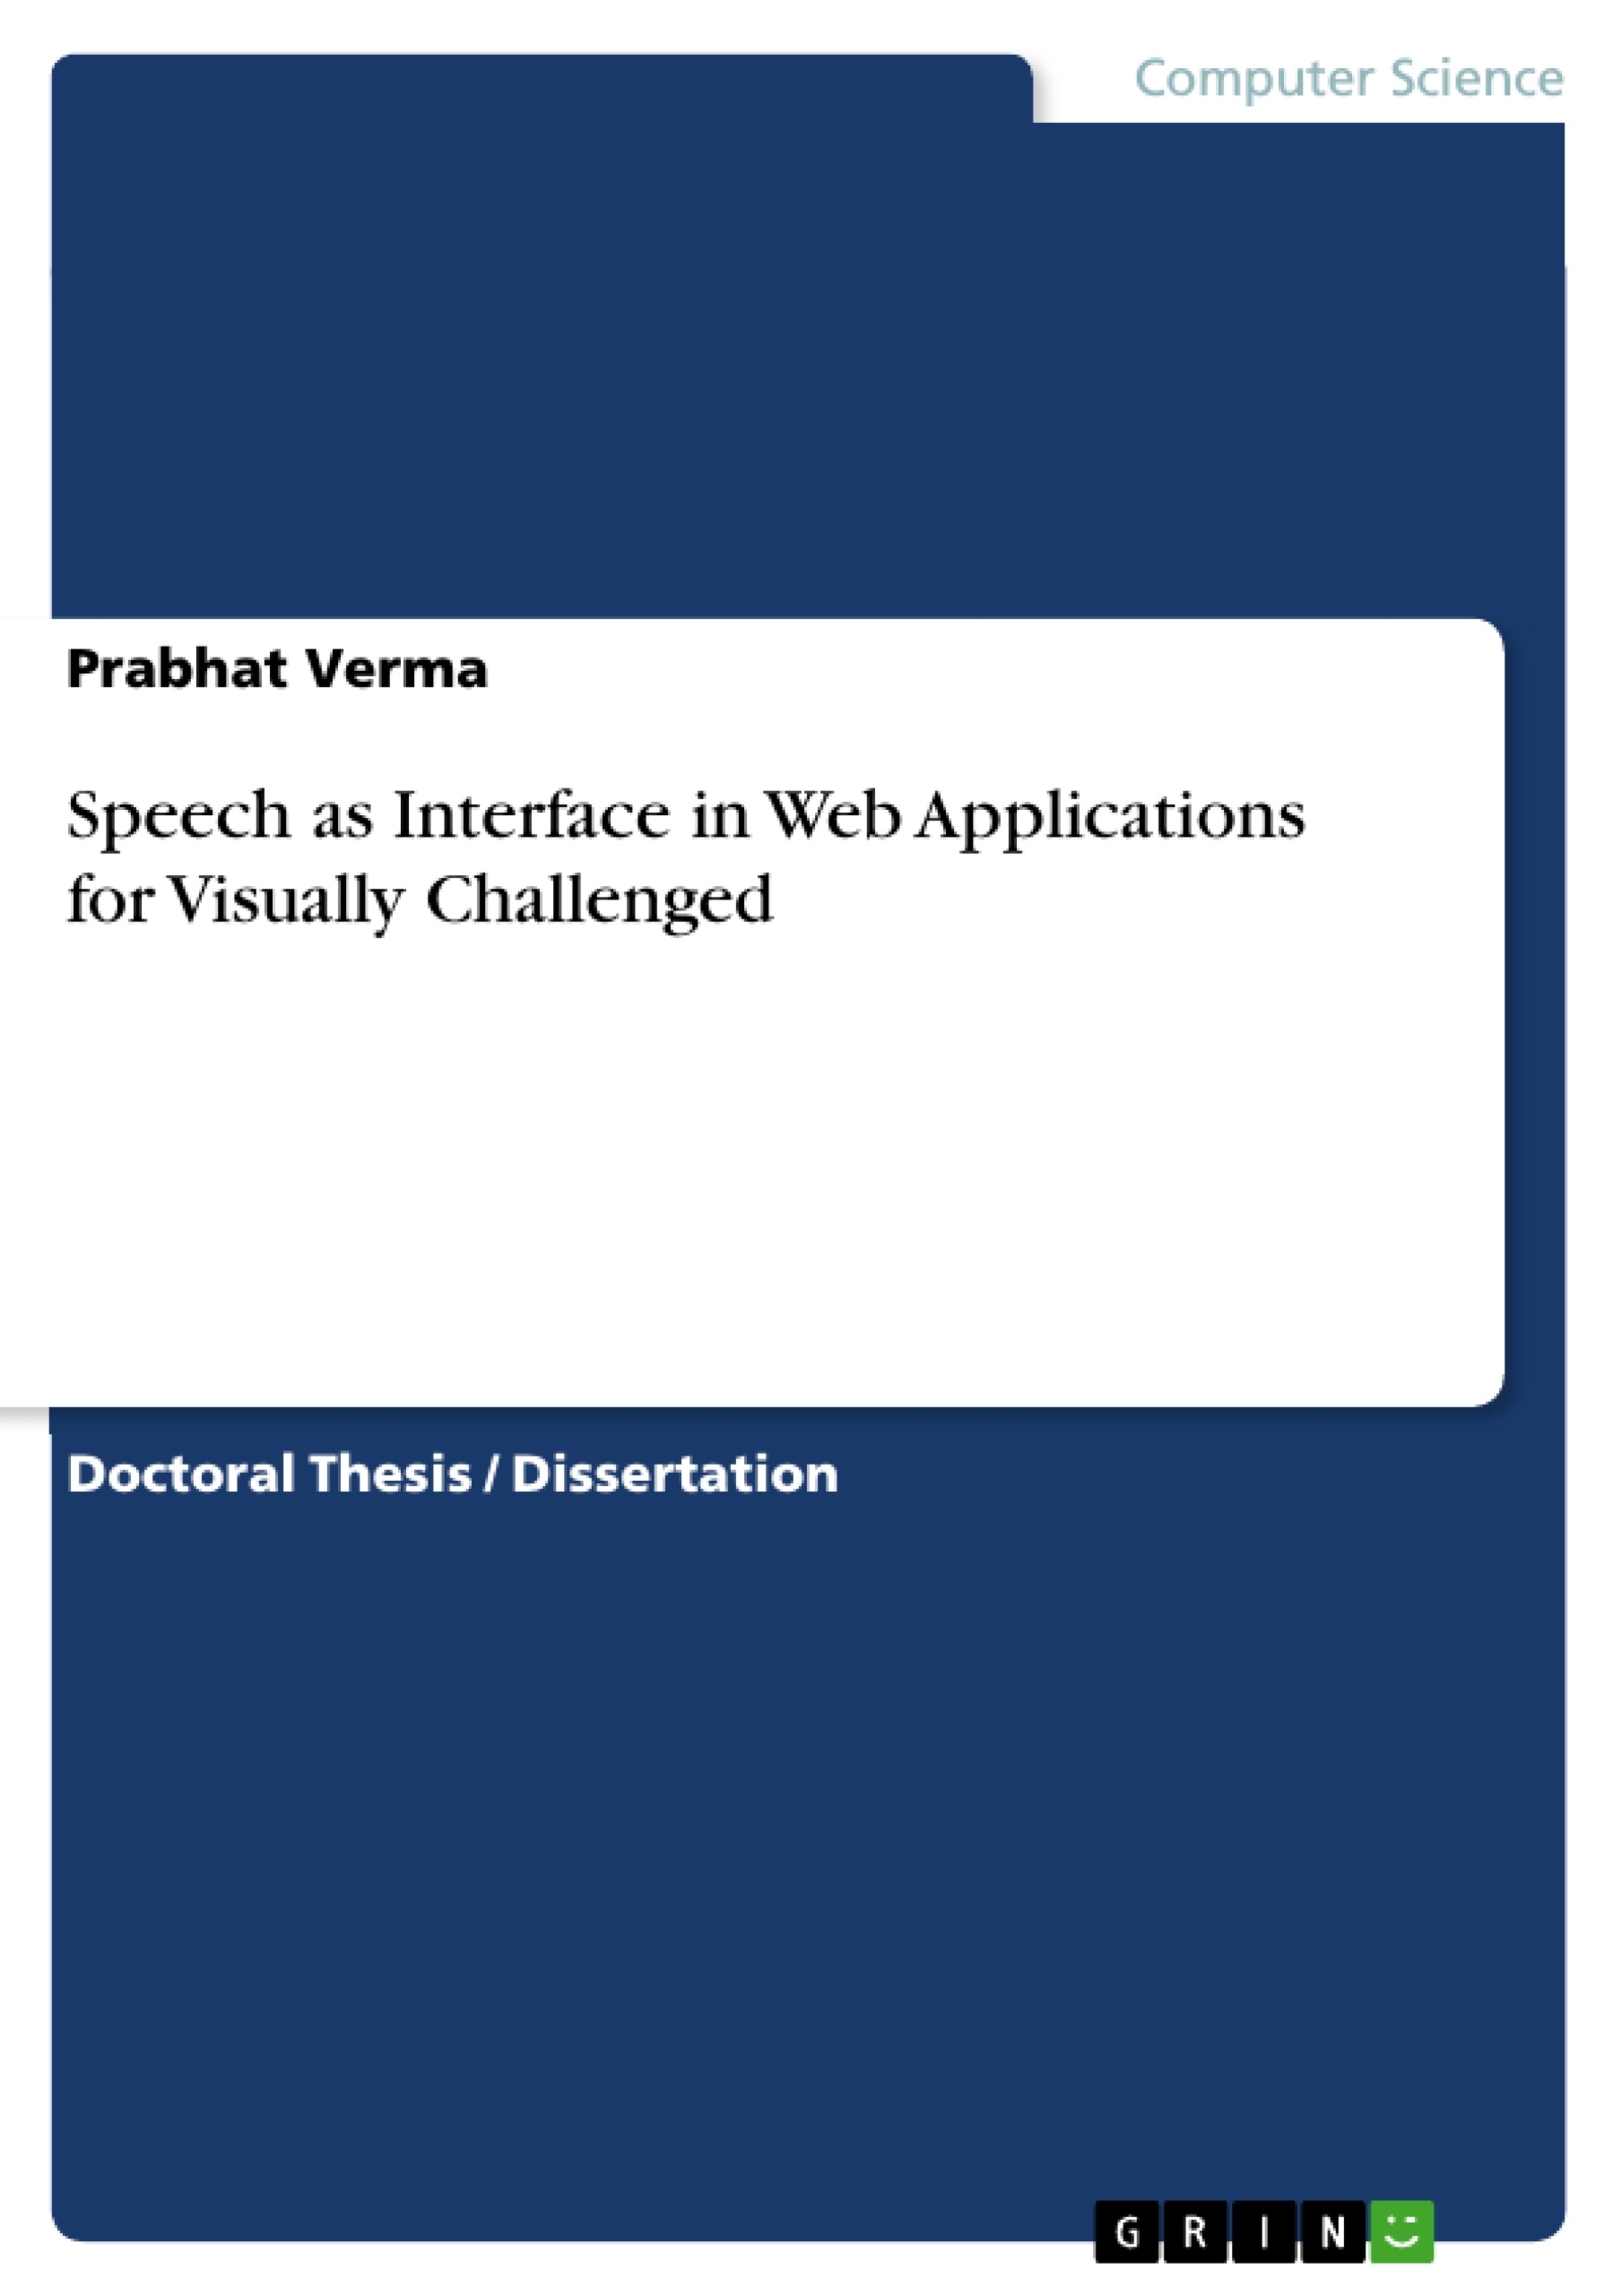 Web　Challenged　Applications　in　Visually　GRIN　Speech　Interface　as　for